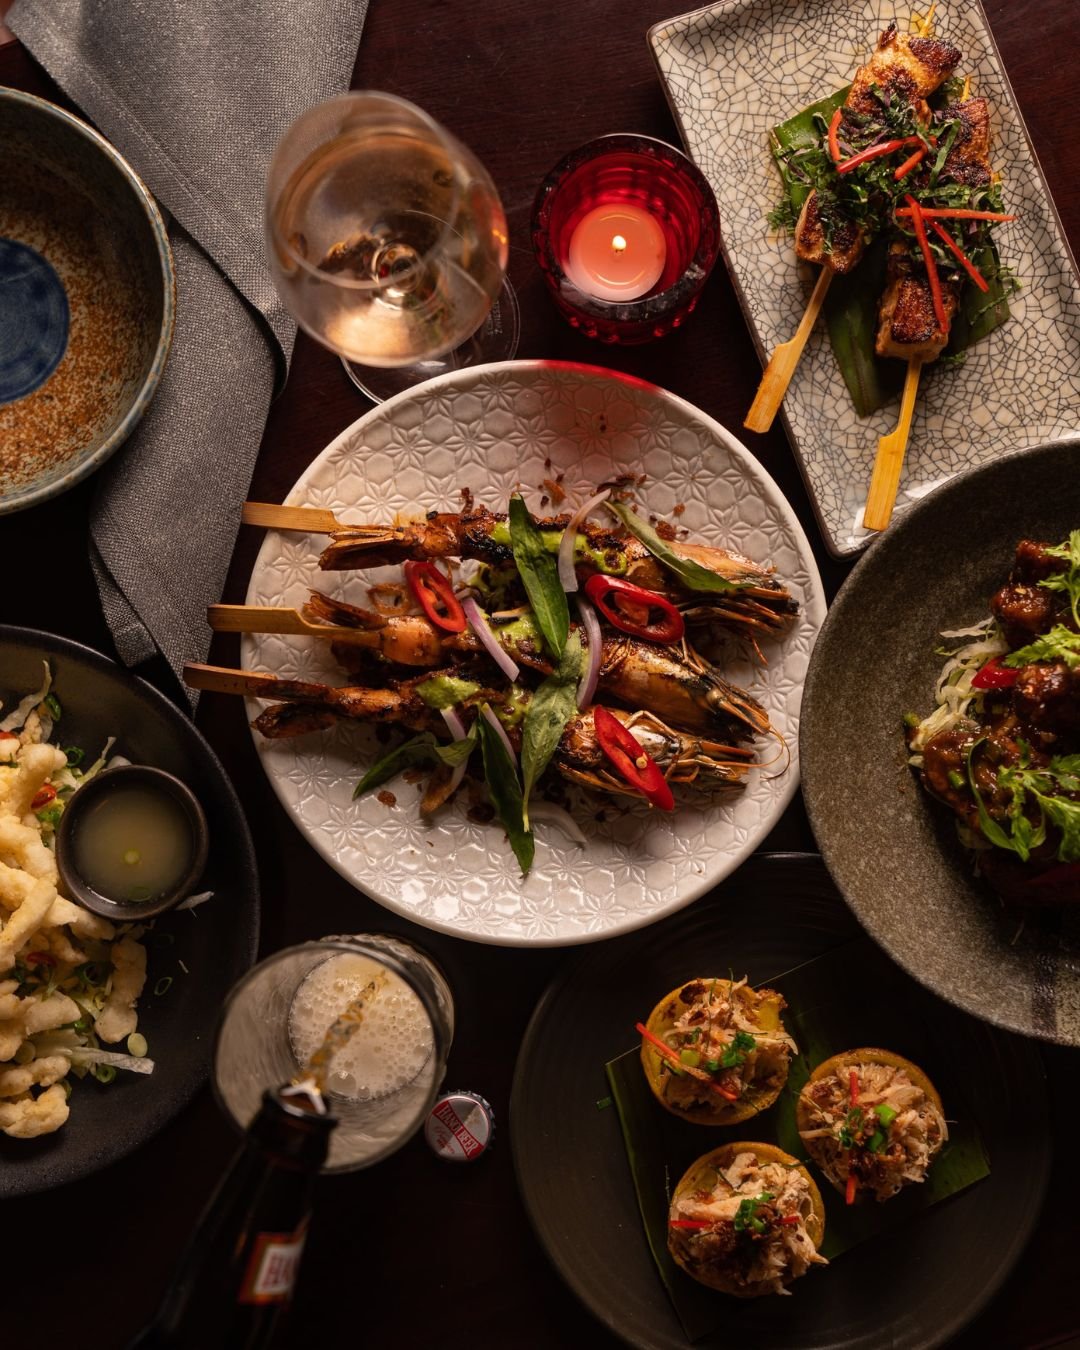 LAST TABLES RELEASED - CELEBRATE MOTHER'S DAY AT RED LANTERN 💐💞 Give mum a break, and let us do the cooking, and the dishes on Mother's Day.

We will be open from 11.30am for a very SPECIAL MOTHER'S DAY LUNCH service on Sunday, 12 May 2024 to spoil